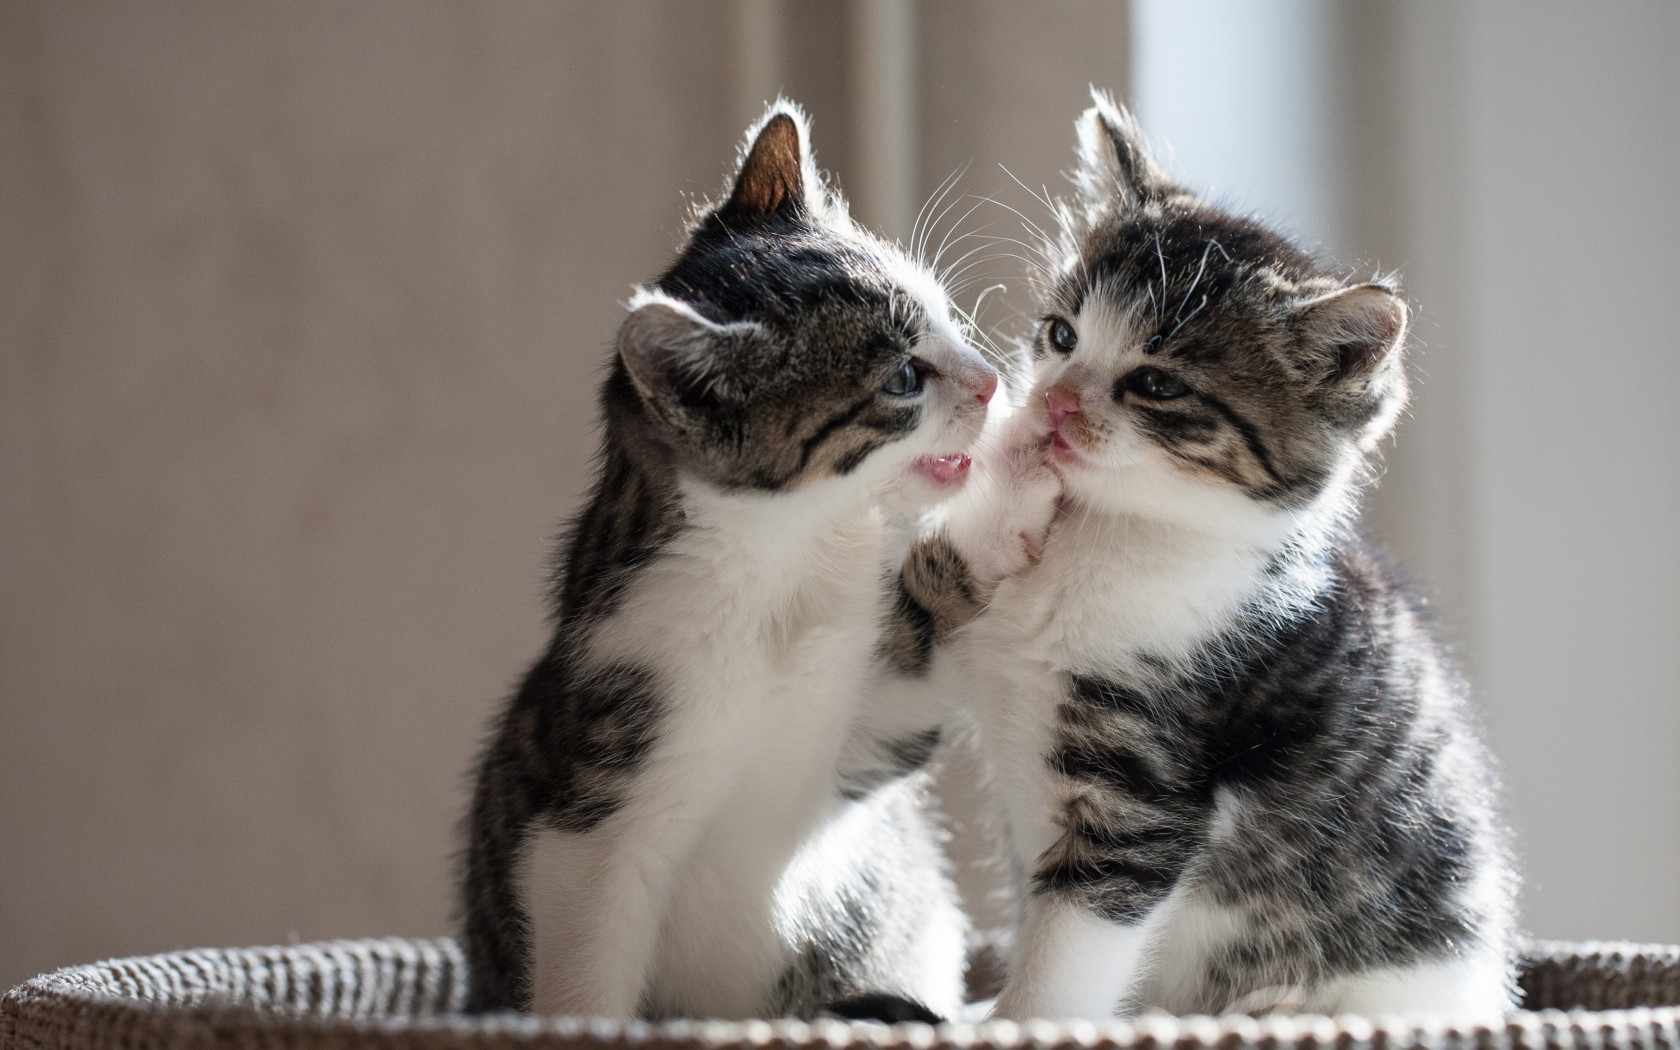 Cute Cat Couple Image Download